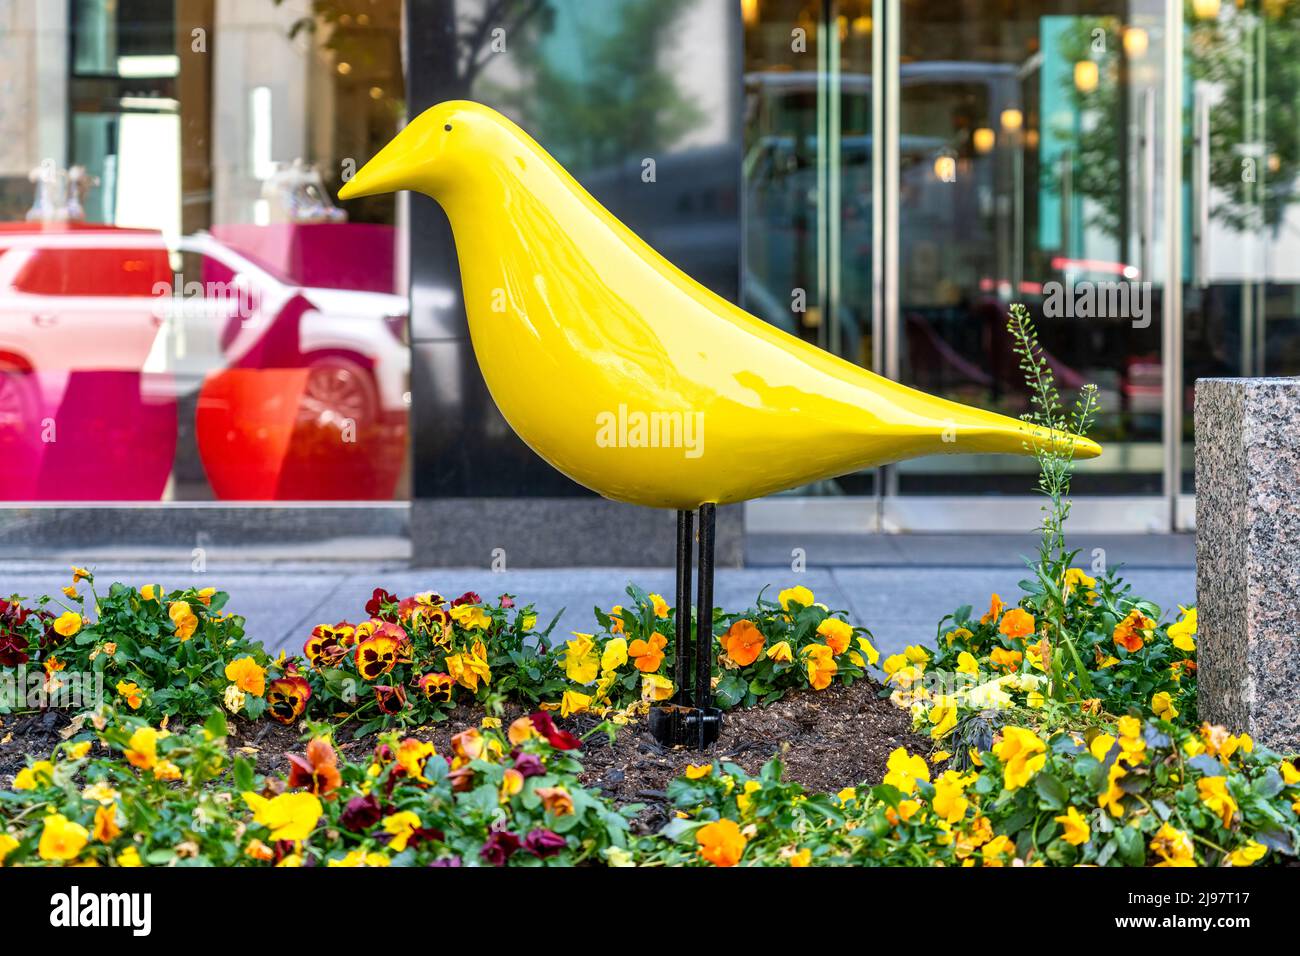 New bird shapes decorations in the gardens of Bloor Yorkville district. The series of ornament interchanges cool and warm color tones. Stock Photo